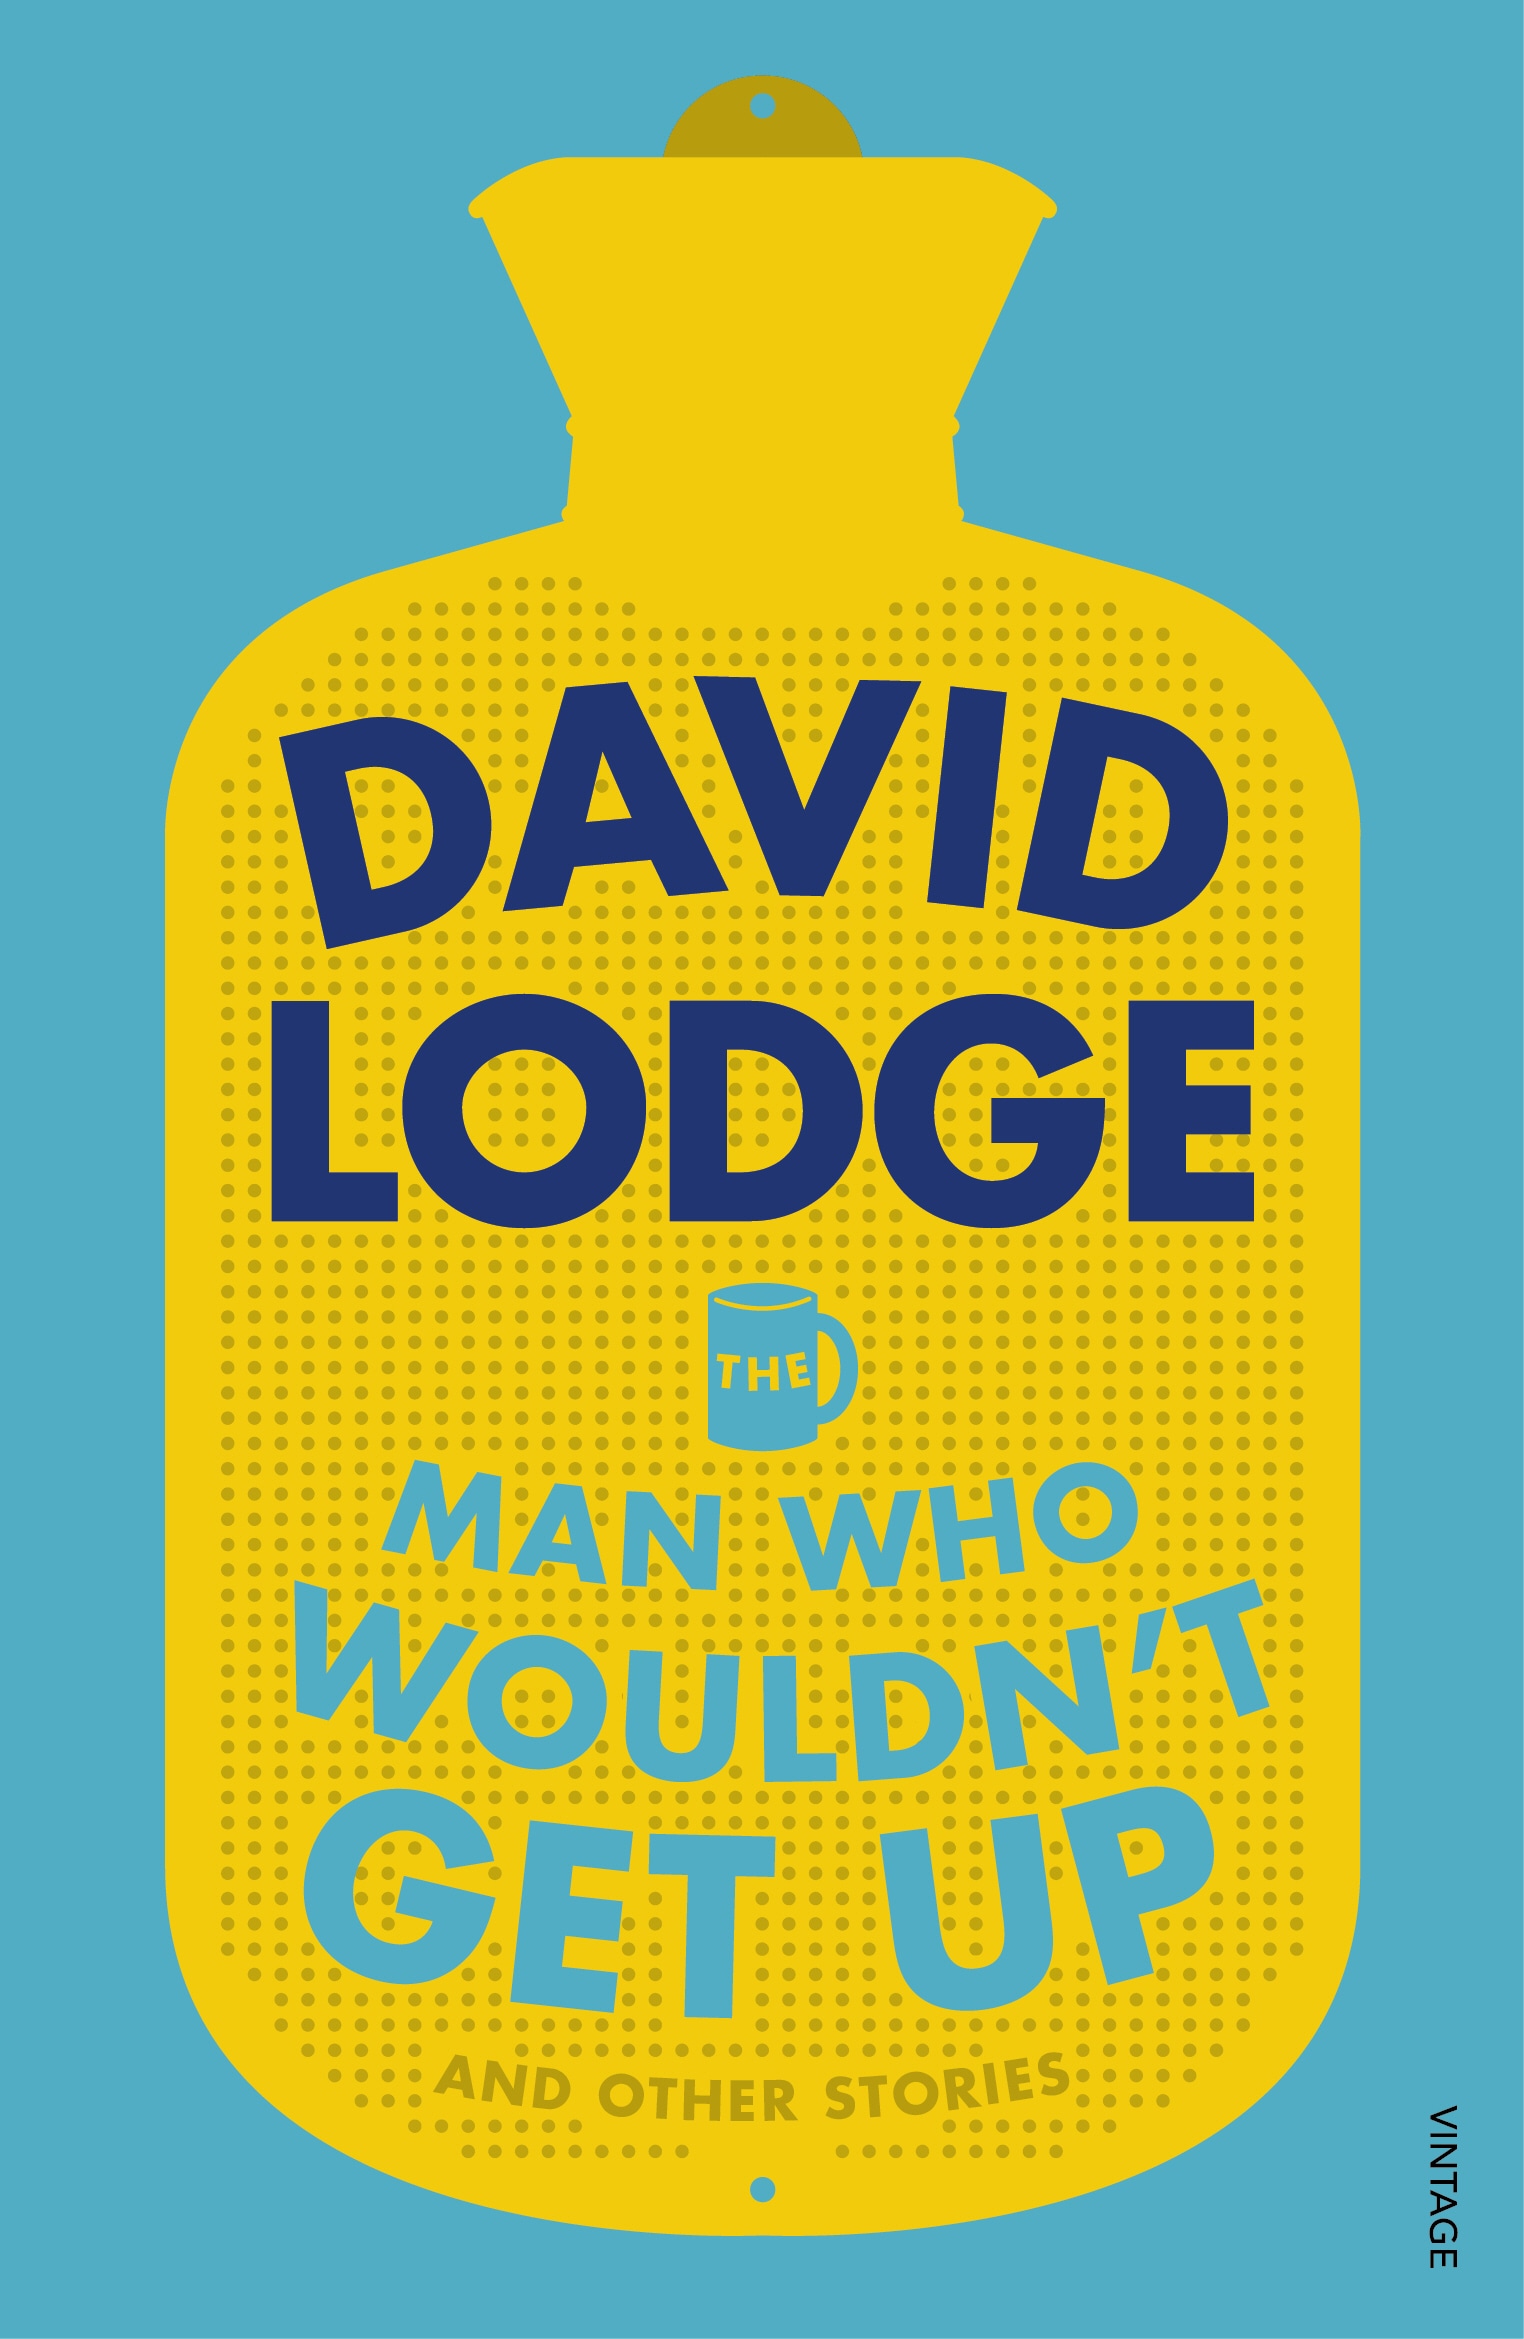 Book “The Man Who Wouldn't Get Up and Other Stories” by David Lodge — September 15, 2016